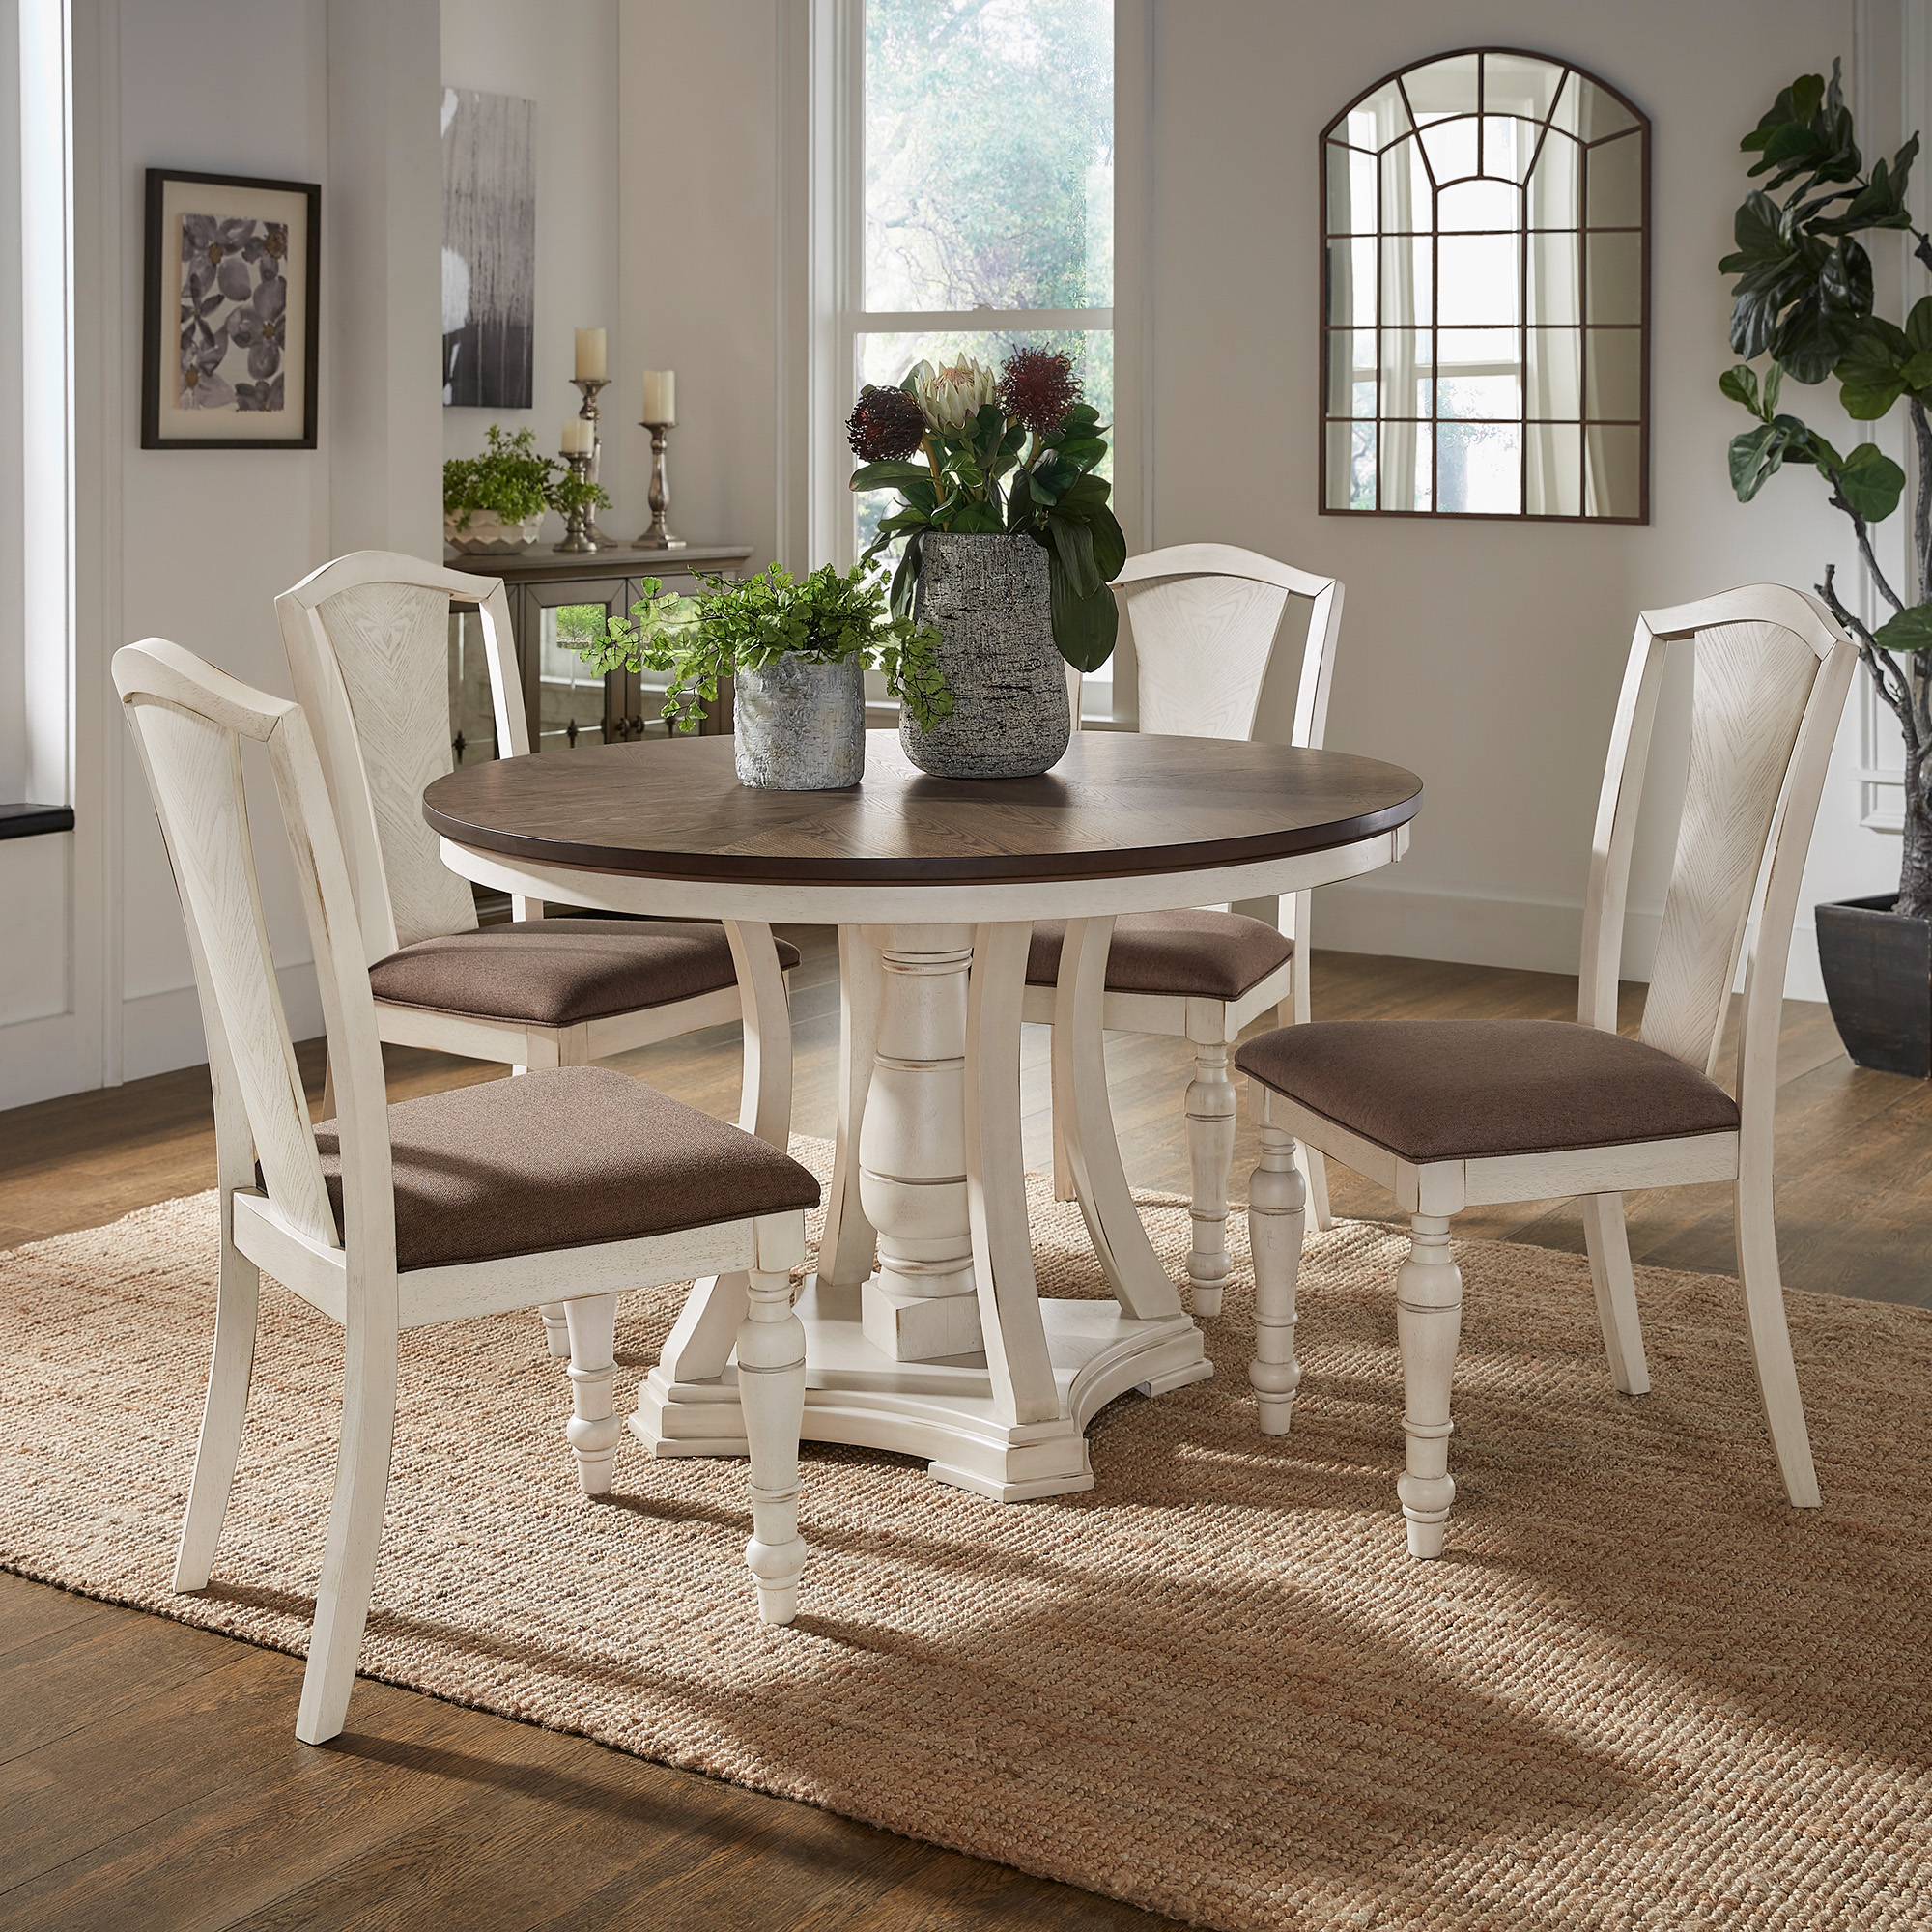 Dual-tone Solid Rubberwood Round Dining Table Set